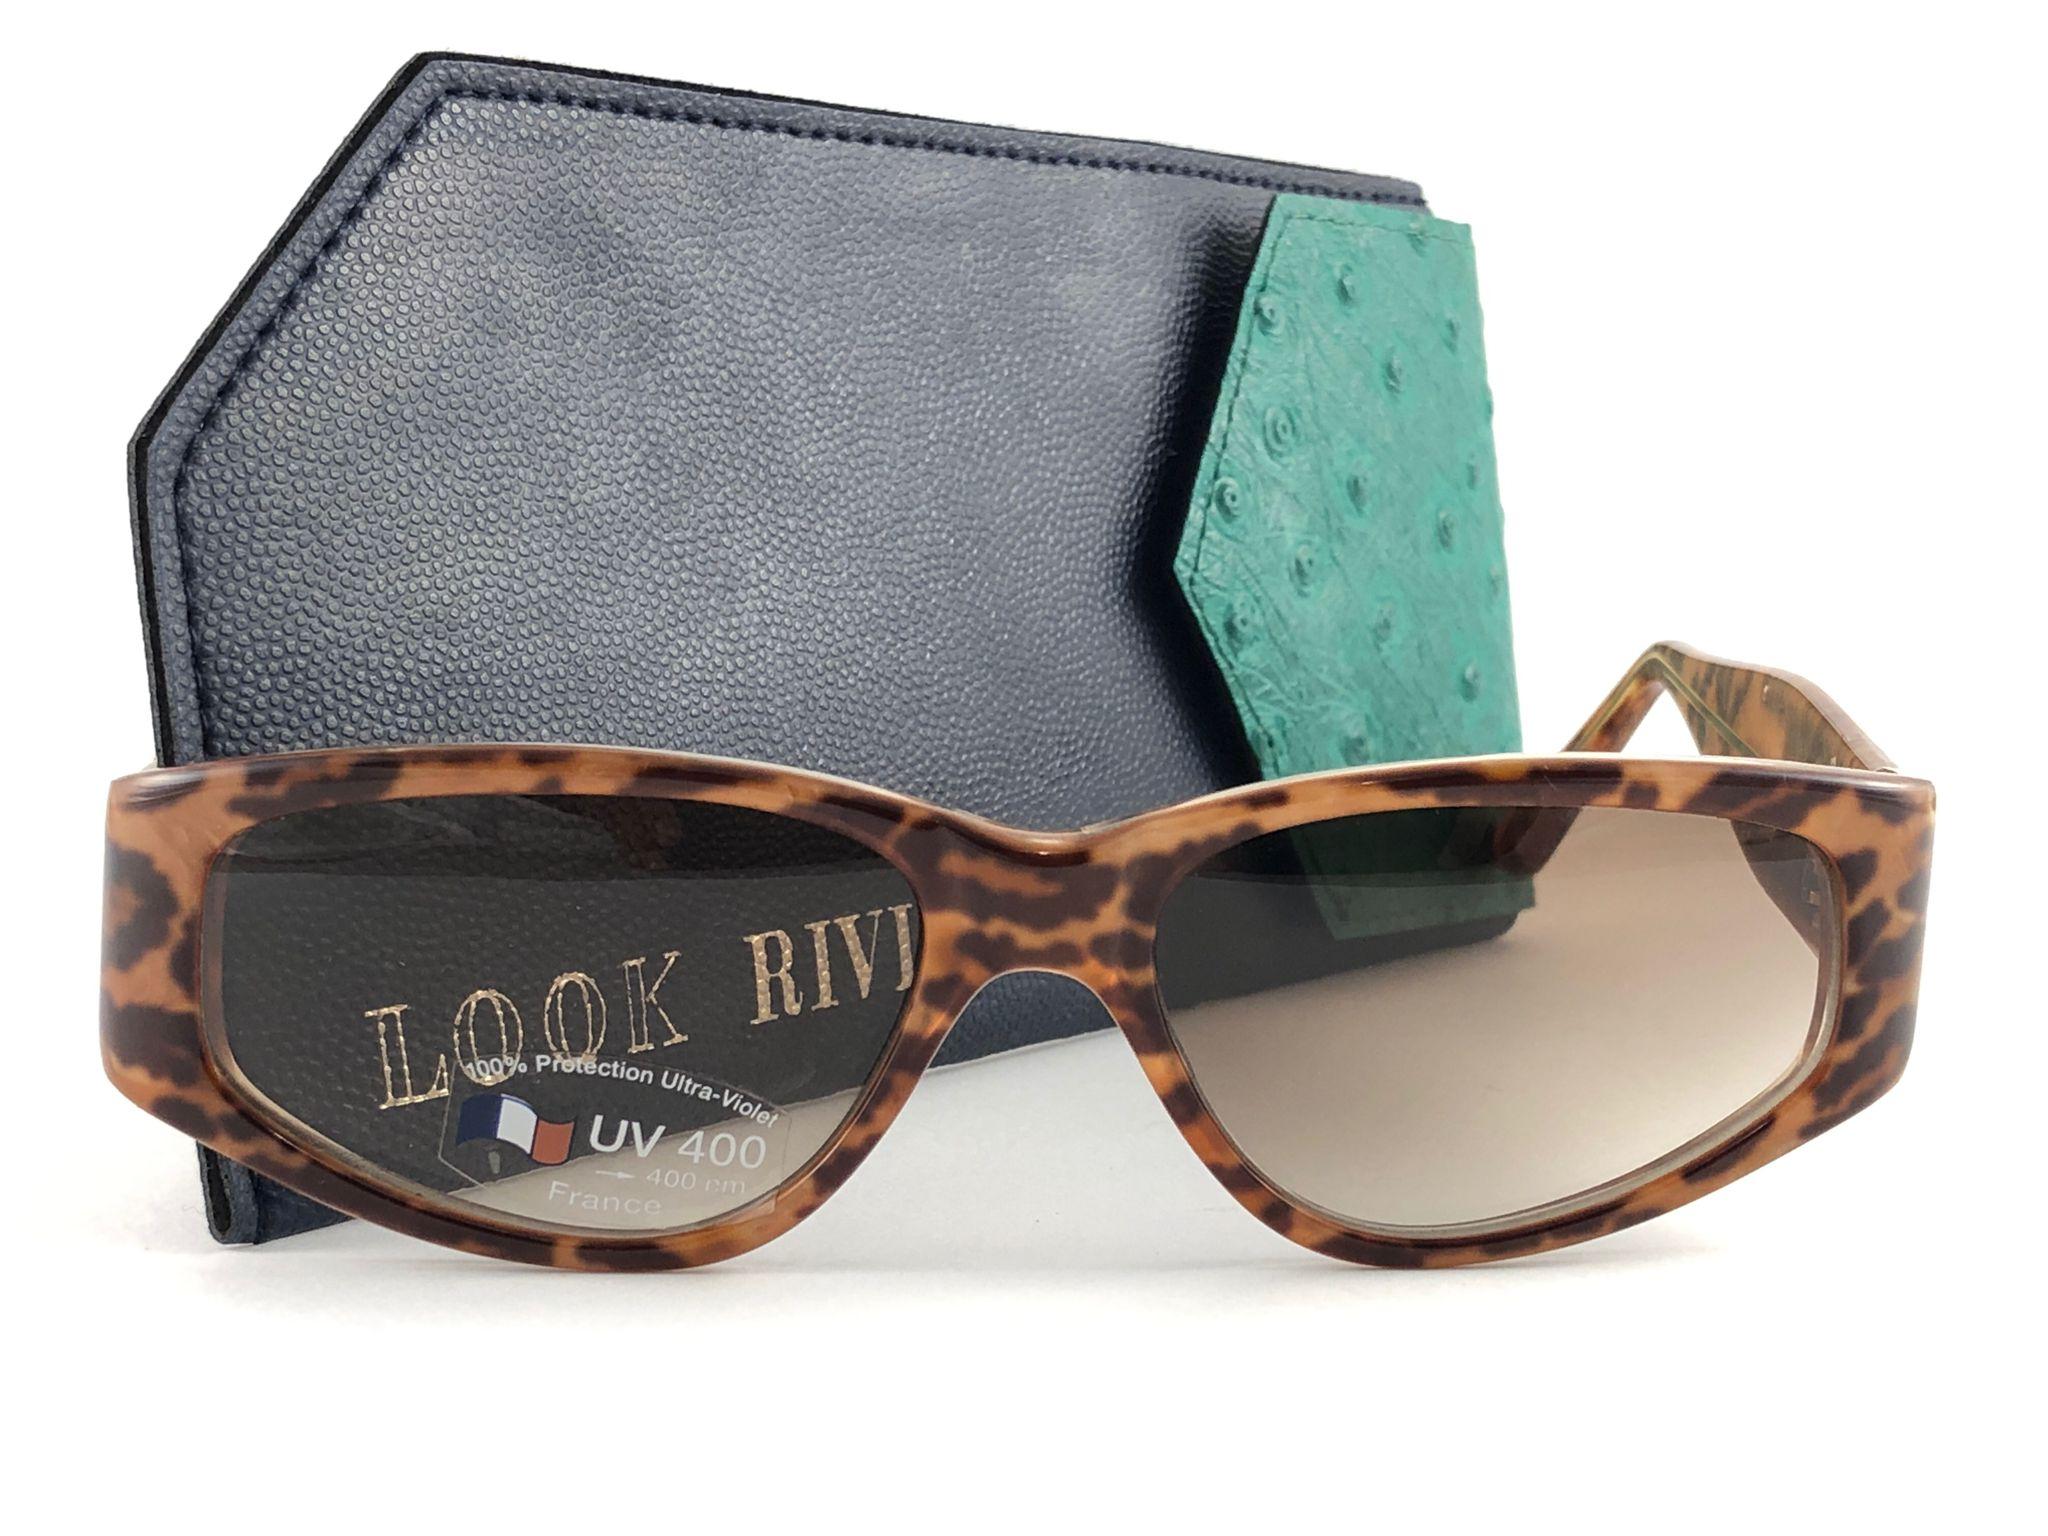 New Vintage Look Riviera leopard printed accented frame with spotless lenses.  
Made in Paris. 
Produced and design in 1980's.  
Please consider this item is nearly 40 years old and could show minor sign of wear due to storage. 

MEASUREMENTS

Front